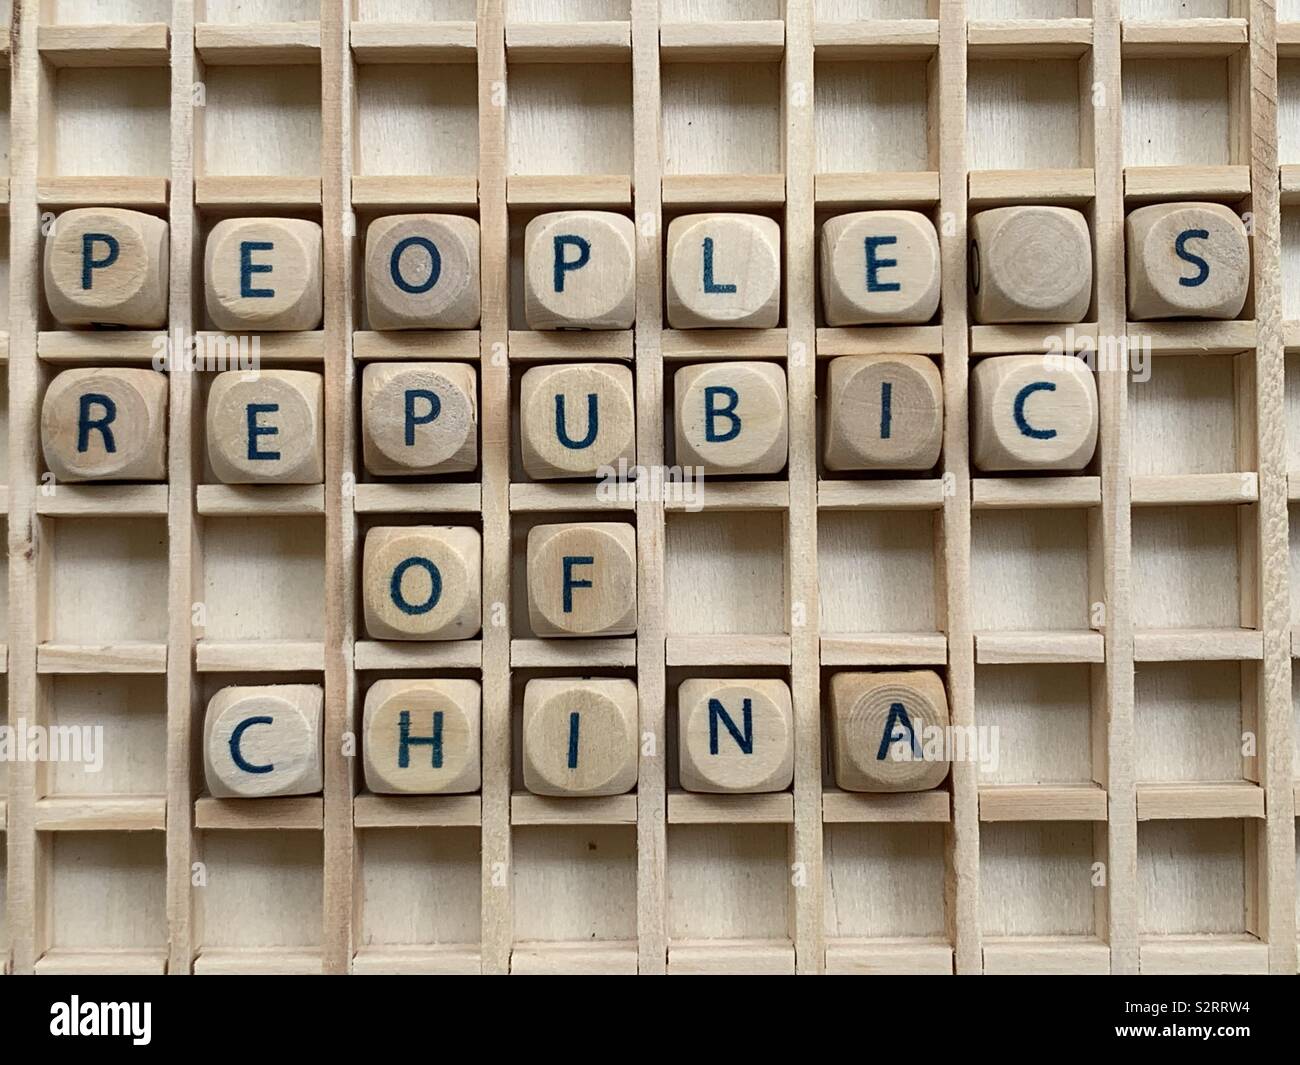 People’s Republic of China, country name composed with wooden cube dice letters Stock Photo